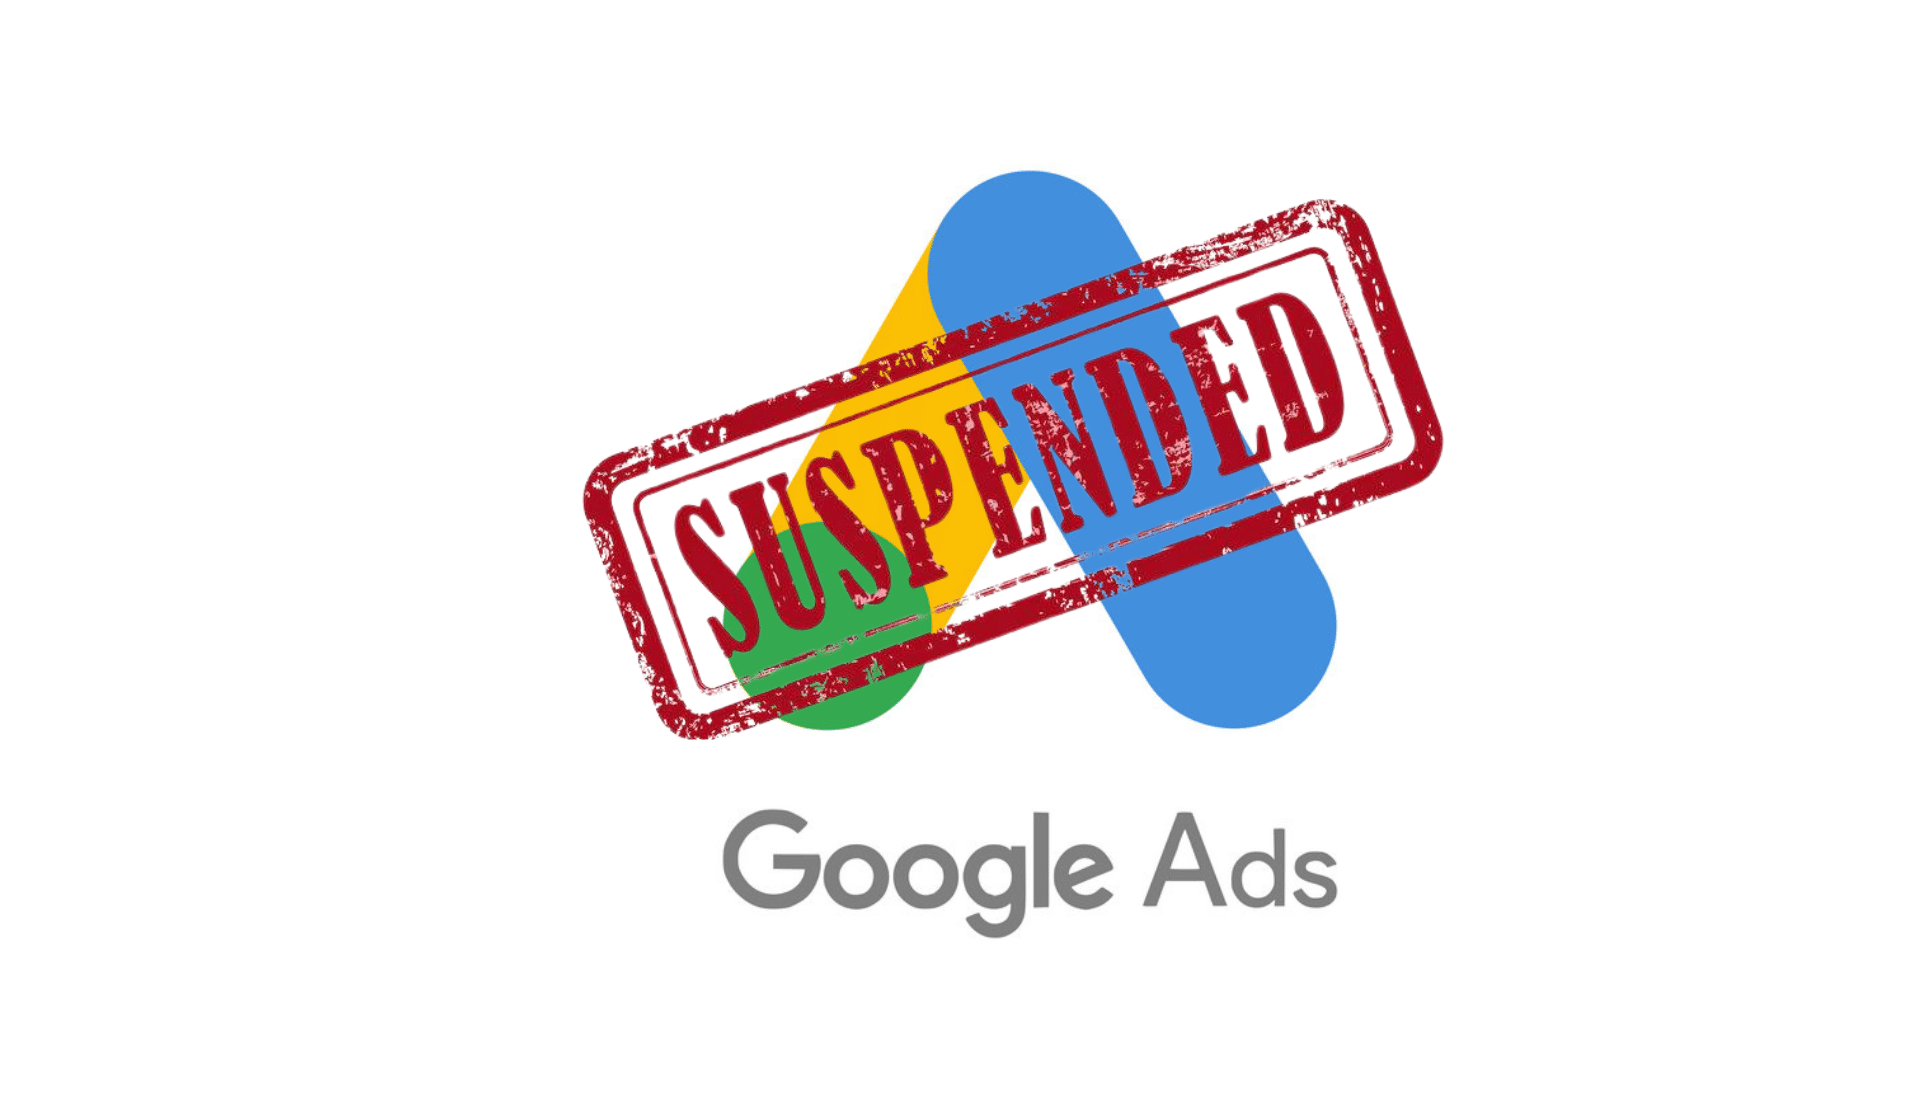 Google limits functionality of suspended ads accounts